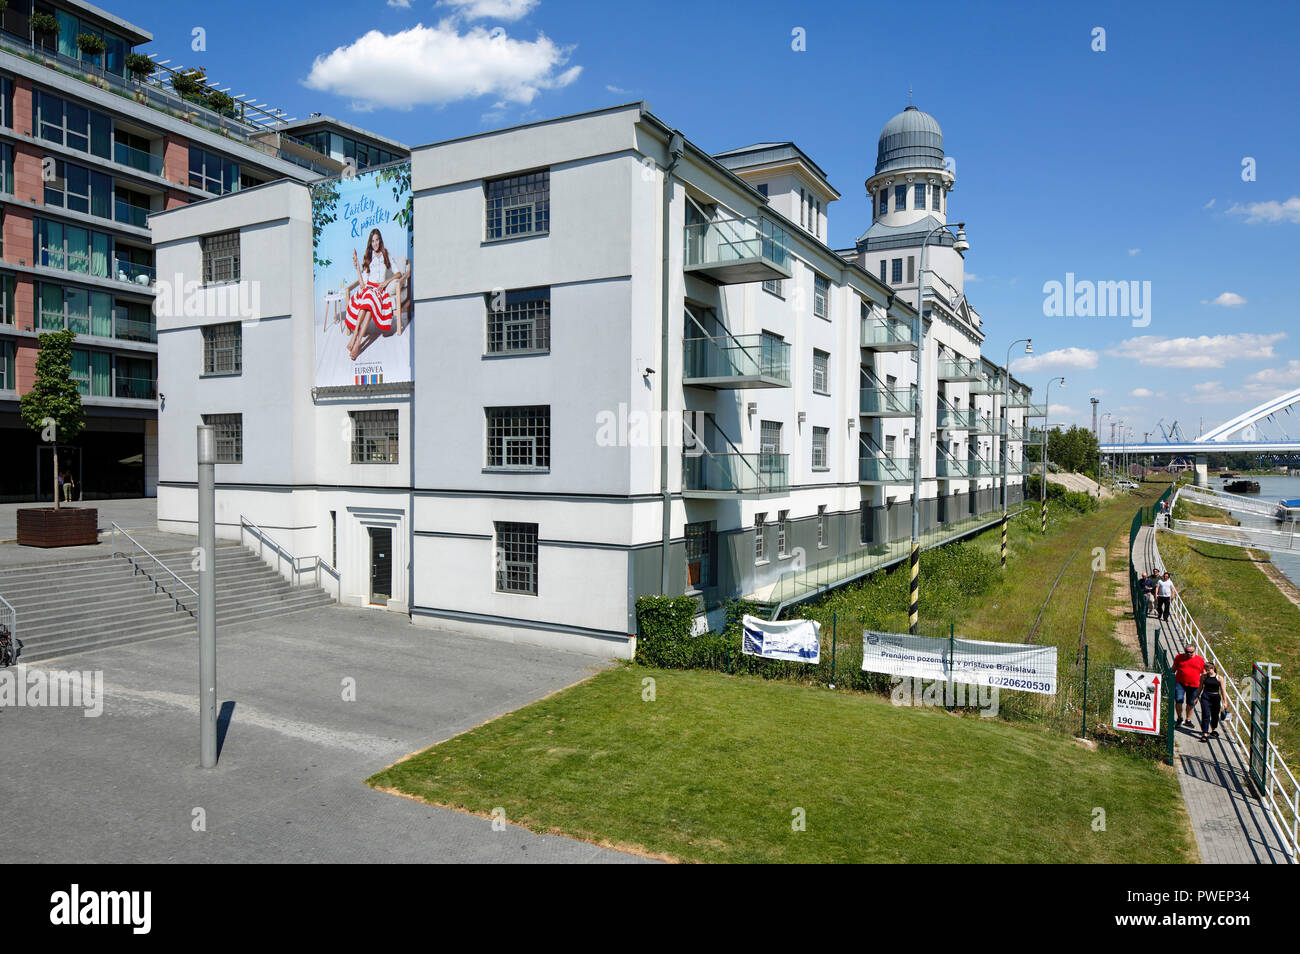 Slovak Republic, Slovakia, Bratislava, Capital City, Danube, Little Carpathians, residential building at the Danube riverbank, multi-family house, multipurpose building, Danube riverwalk, protective wall, shipping pier, gangway, people stroll along a towpath Stock Photo